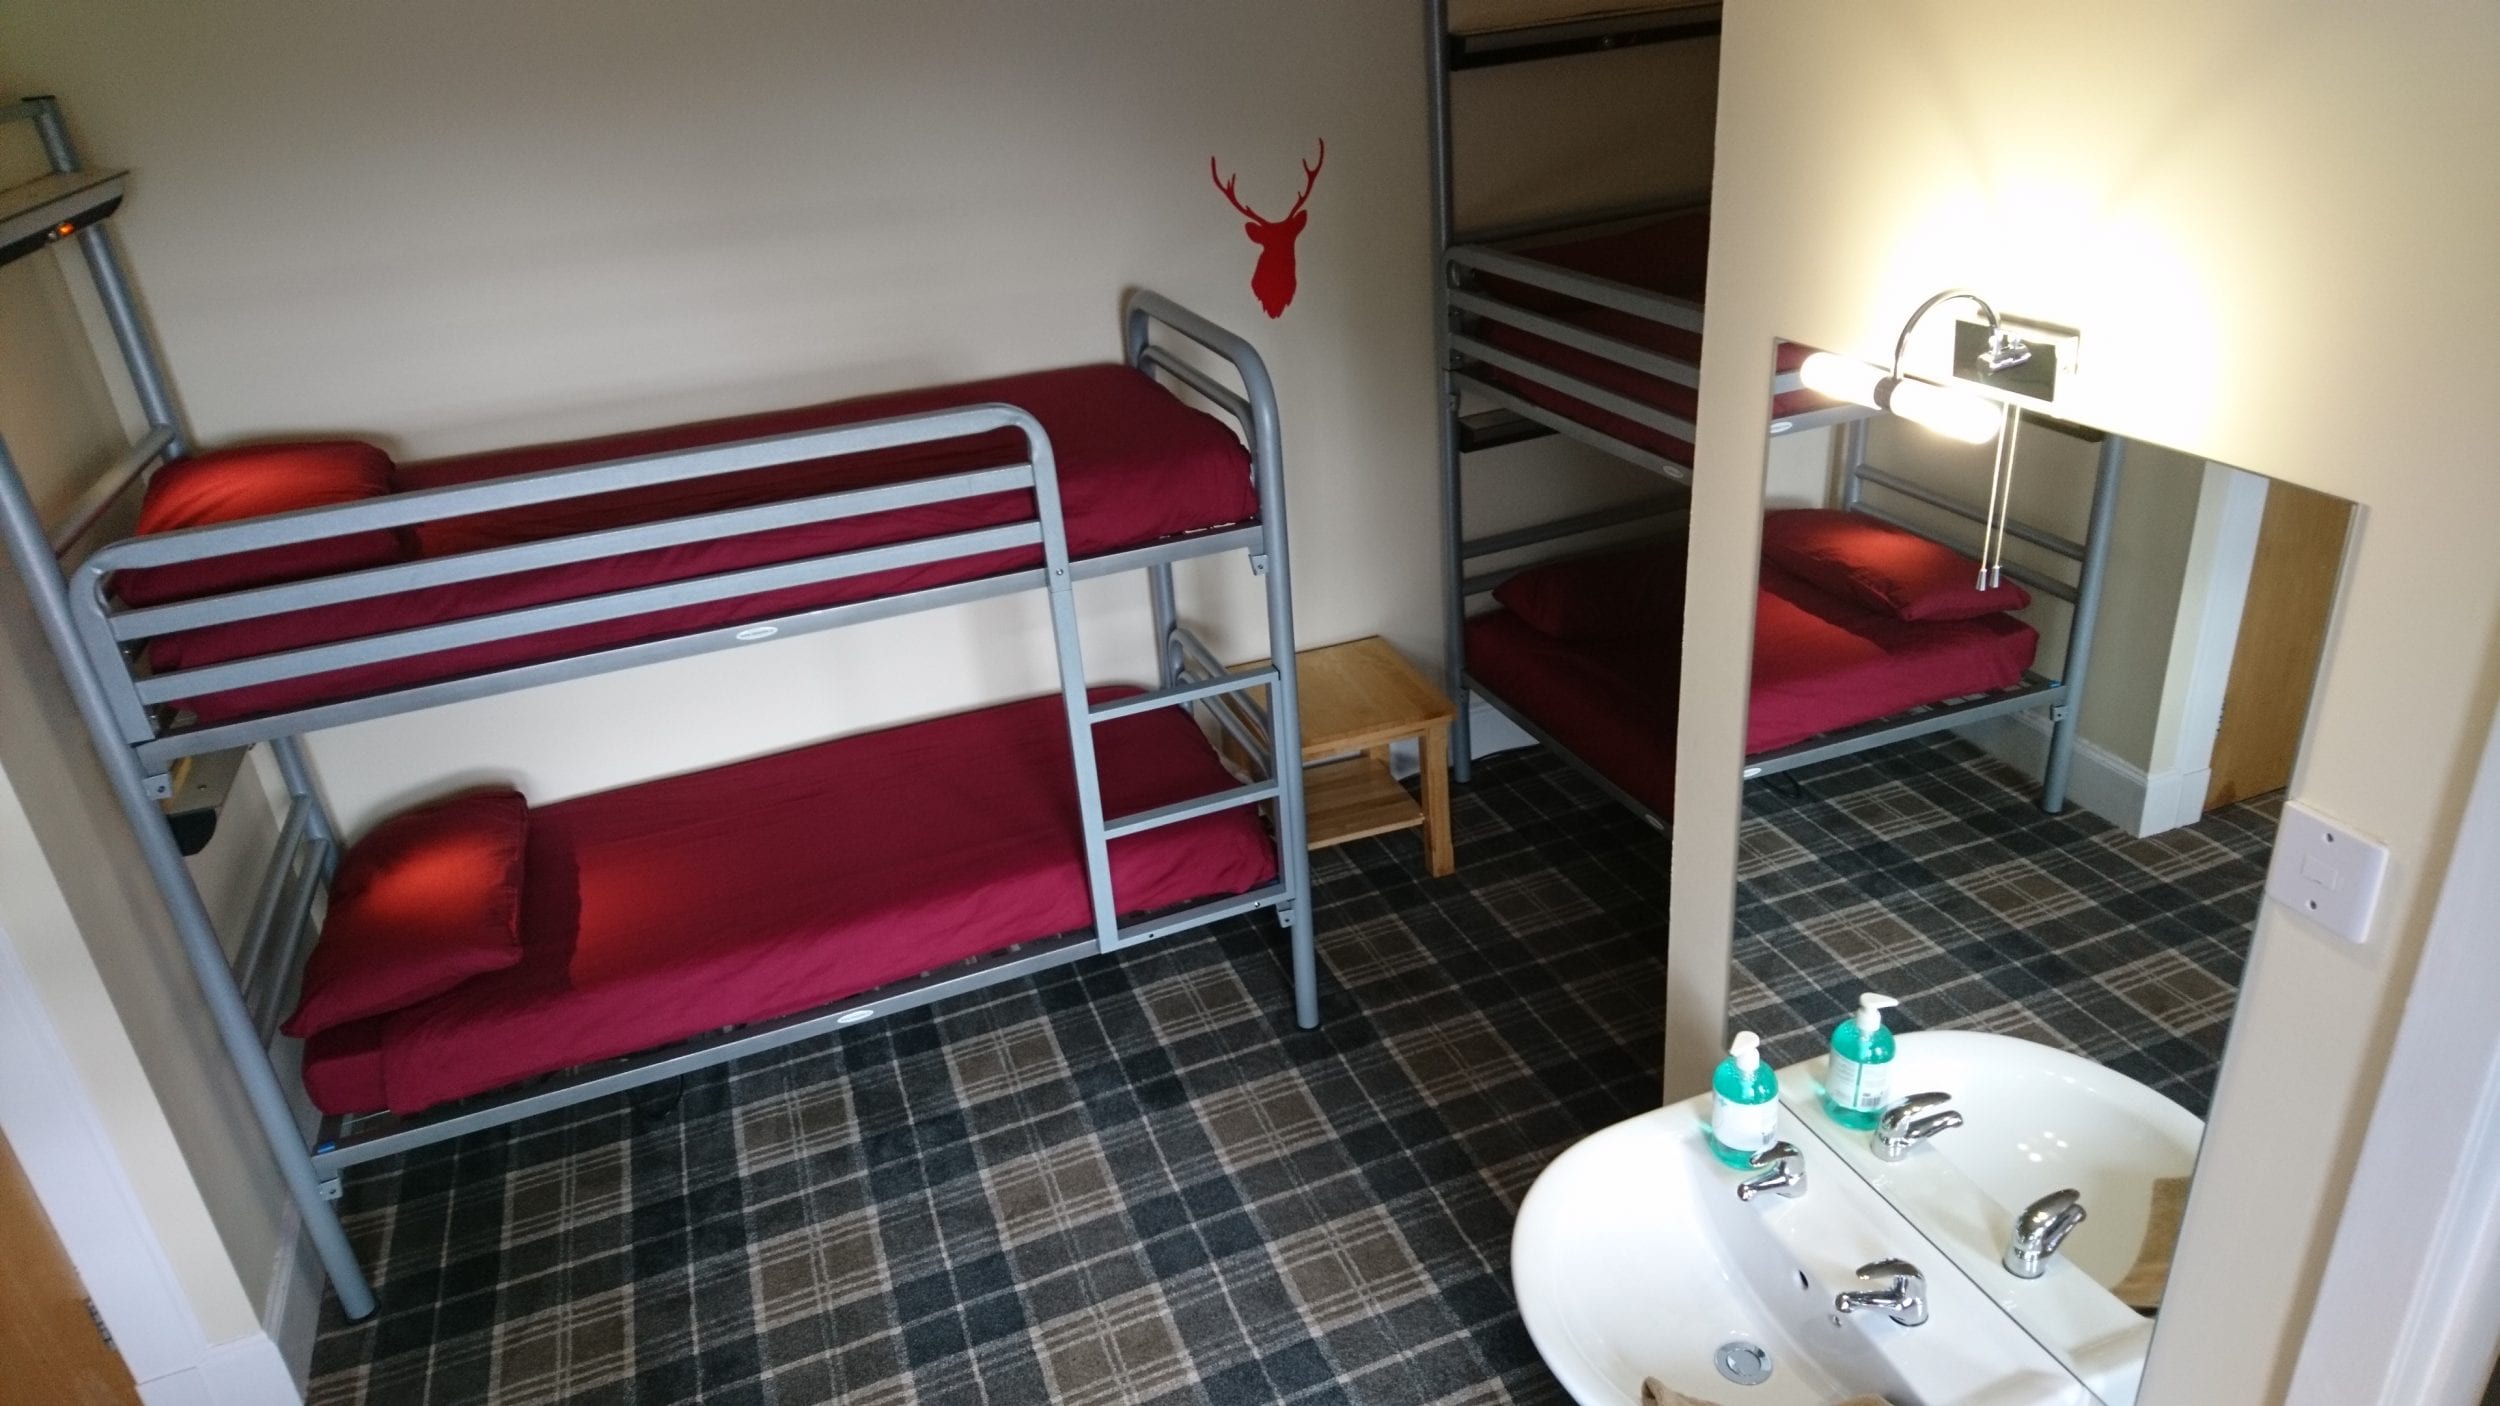 Stag Room in Morags lodge